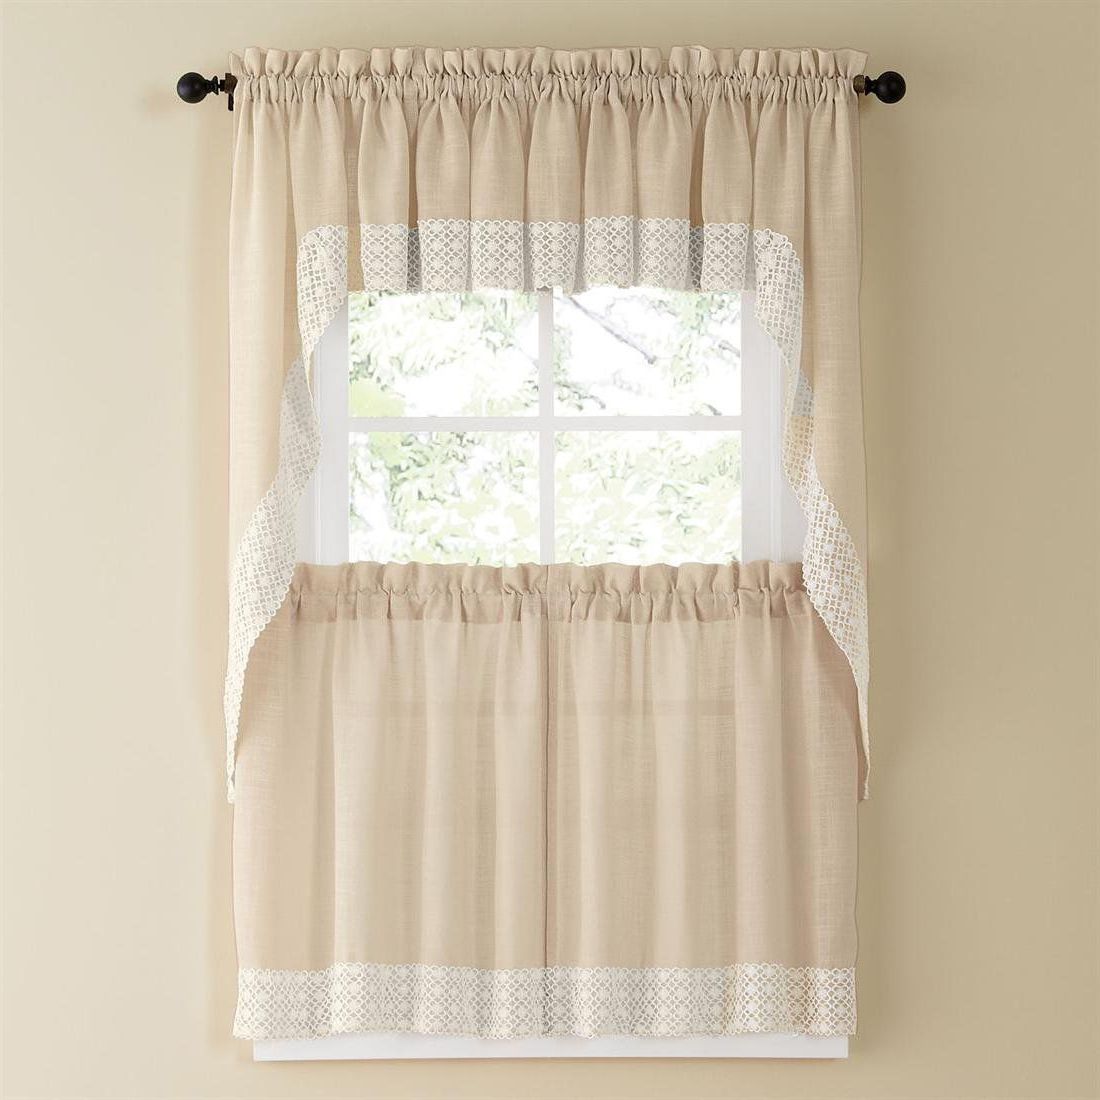 Featured Photo of French Vanilla Country Style Curtain Parts With White Daisy Lace Accent